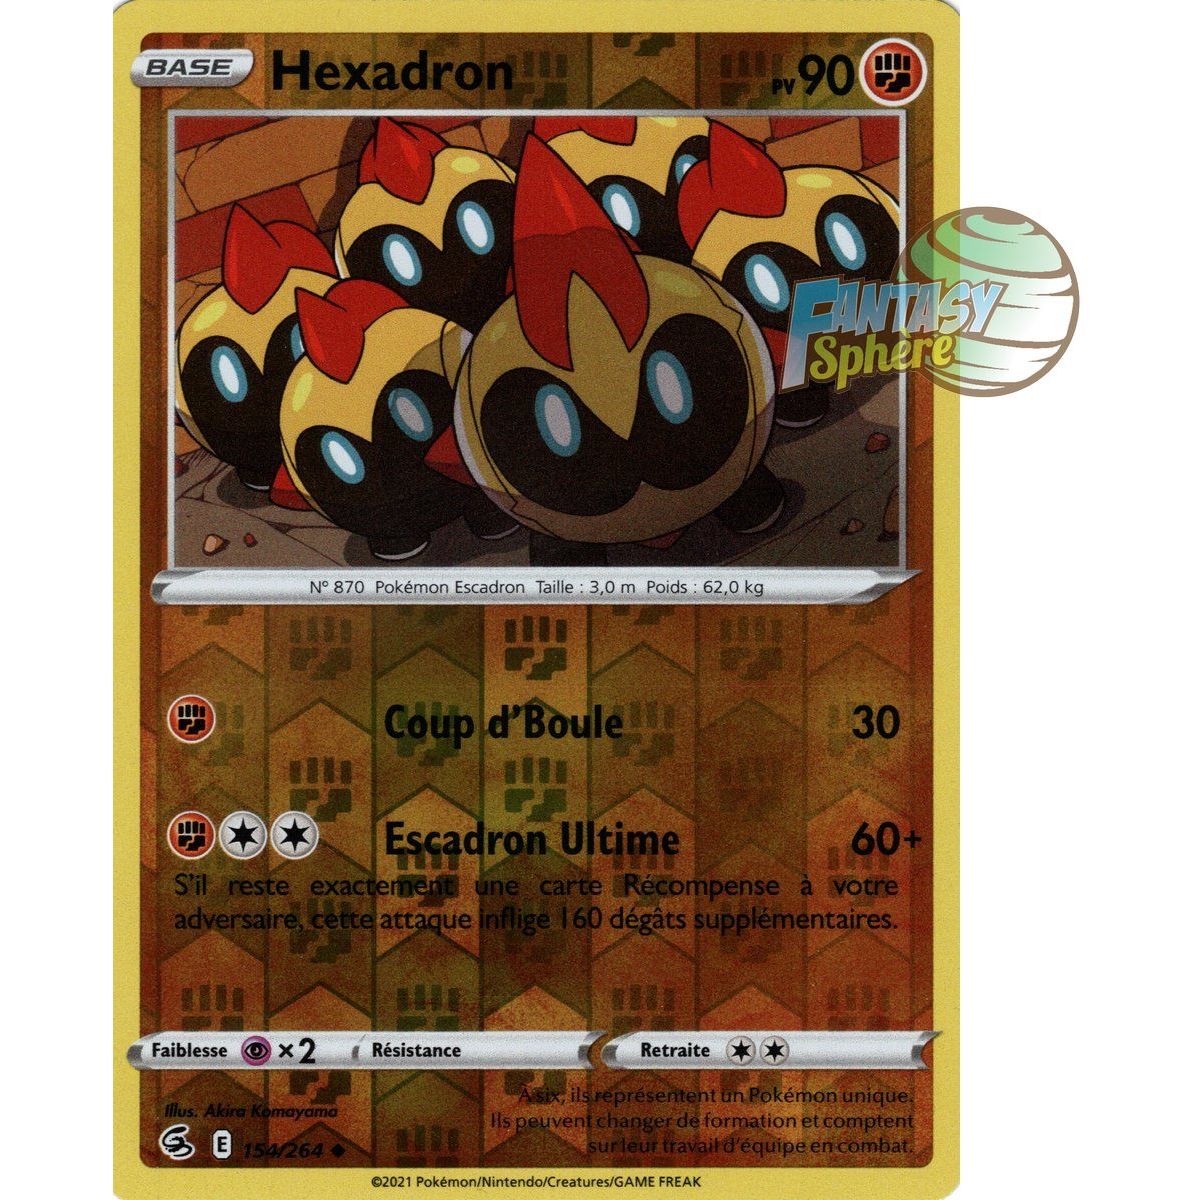 Hexadron - Reverse 154/264 - Sword and Shield 8 Fusion Fist